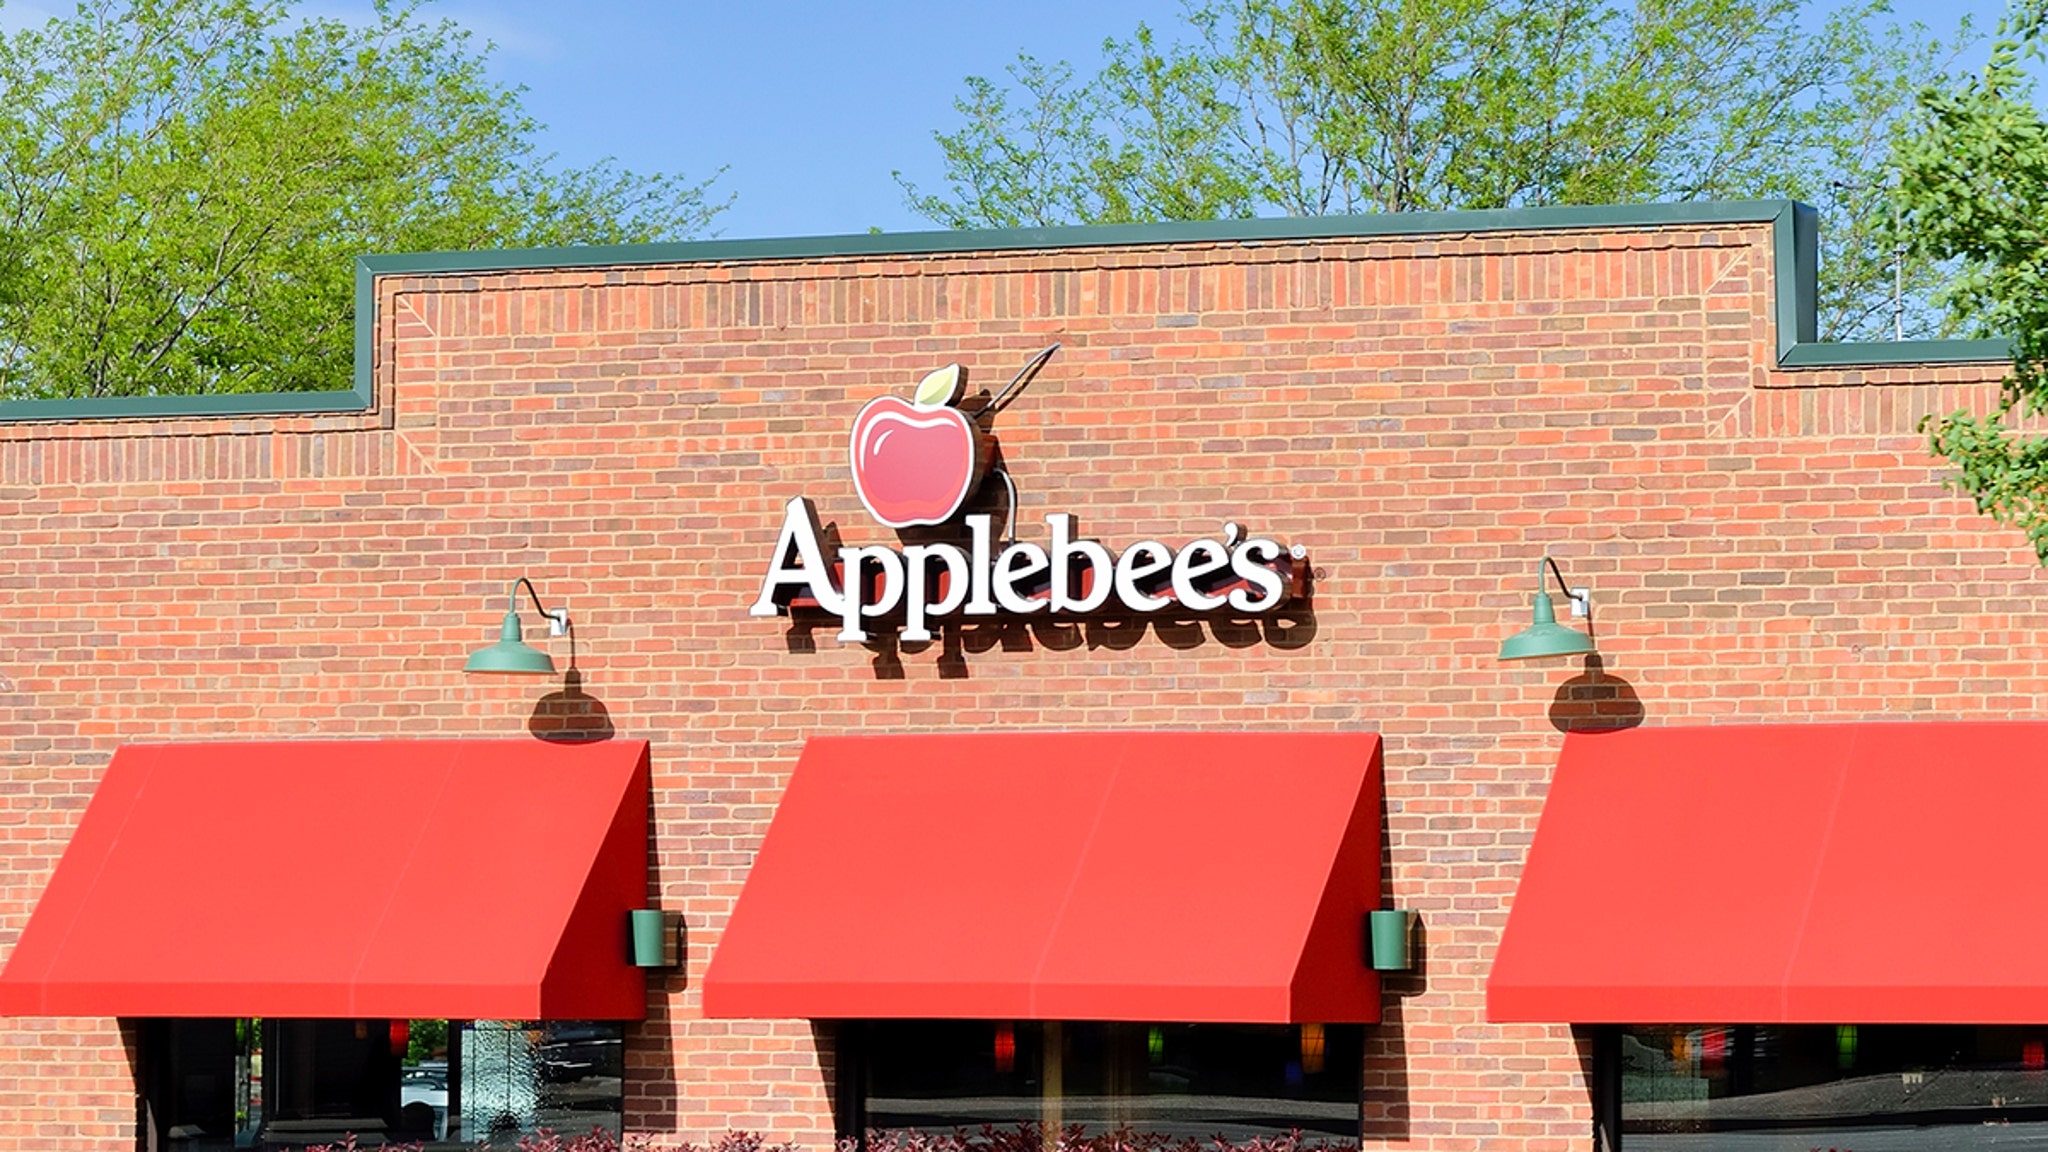 Applebee's Franchise Exec Floats Lowering Wages Amid High Gas Prices